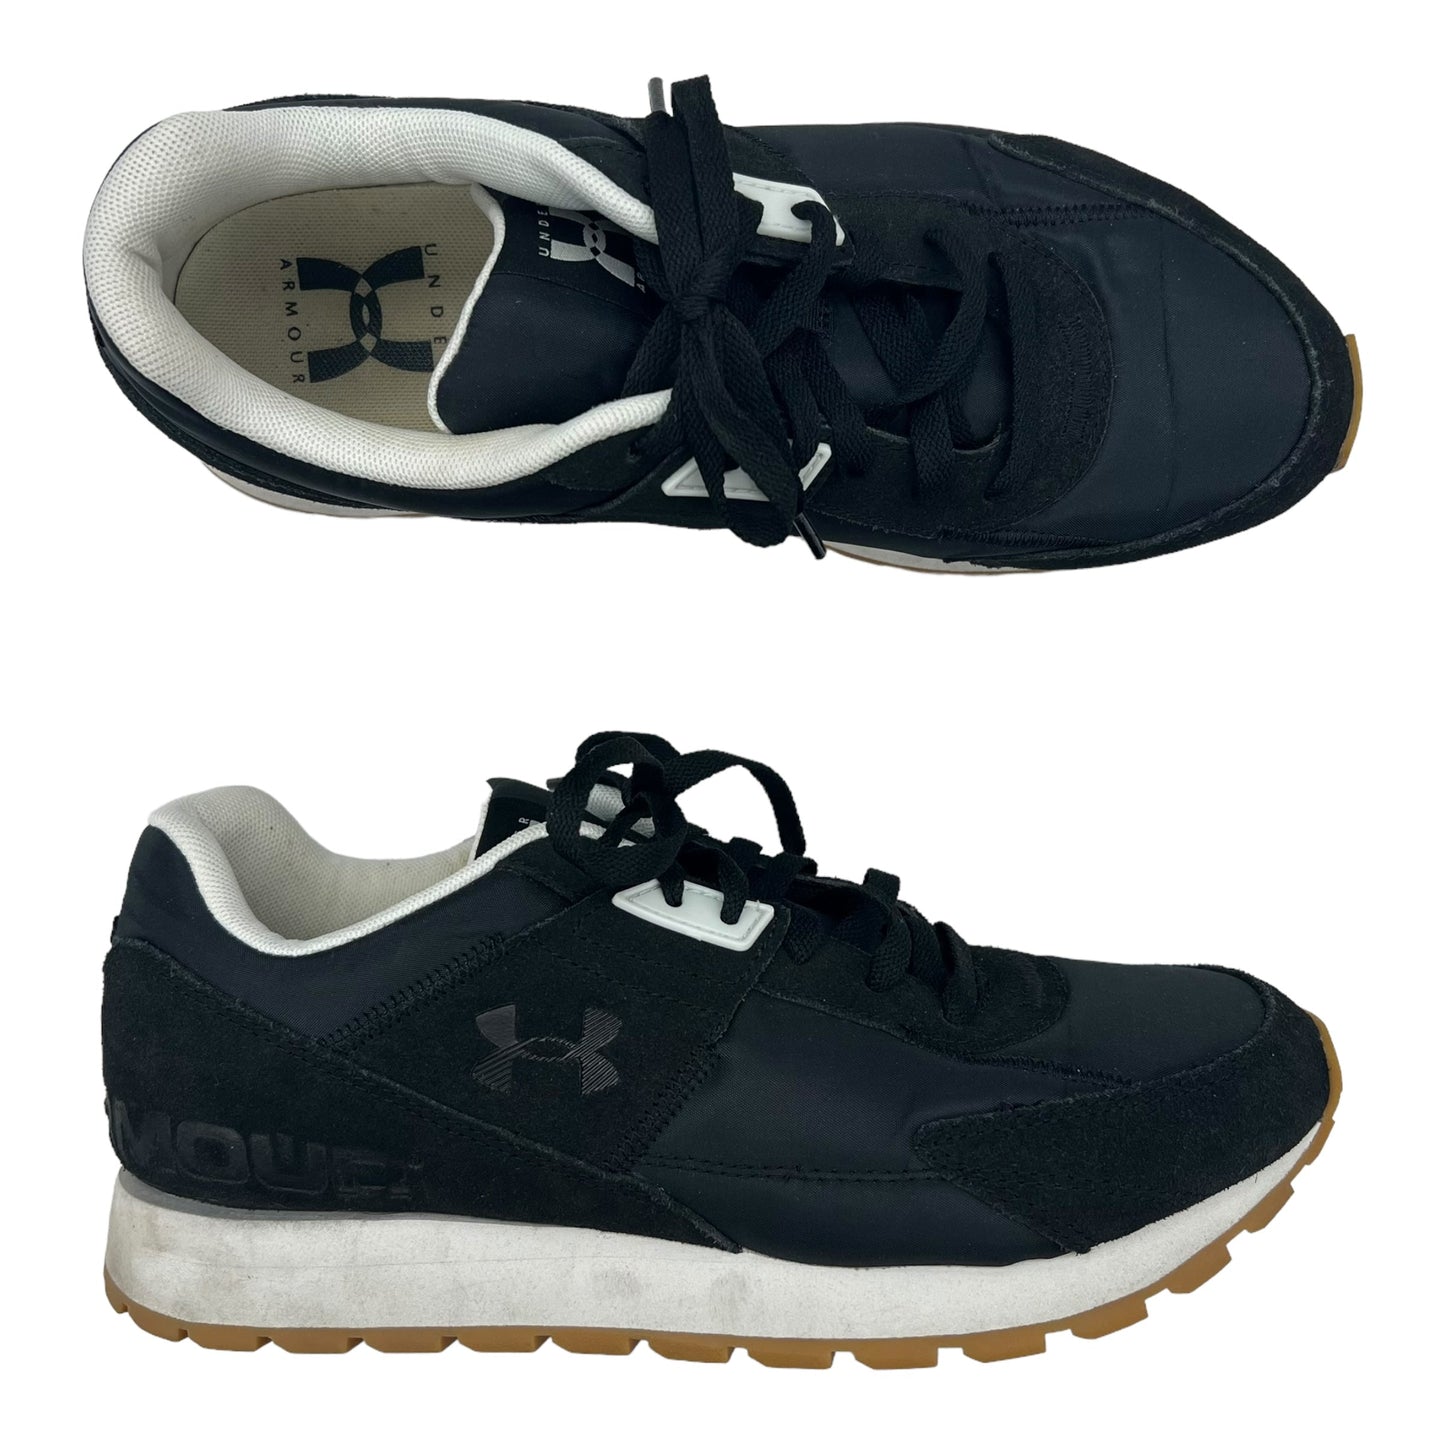 Black Shoes Sneakers Under Armour, Size 11